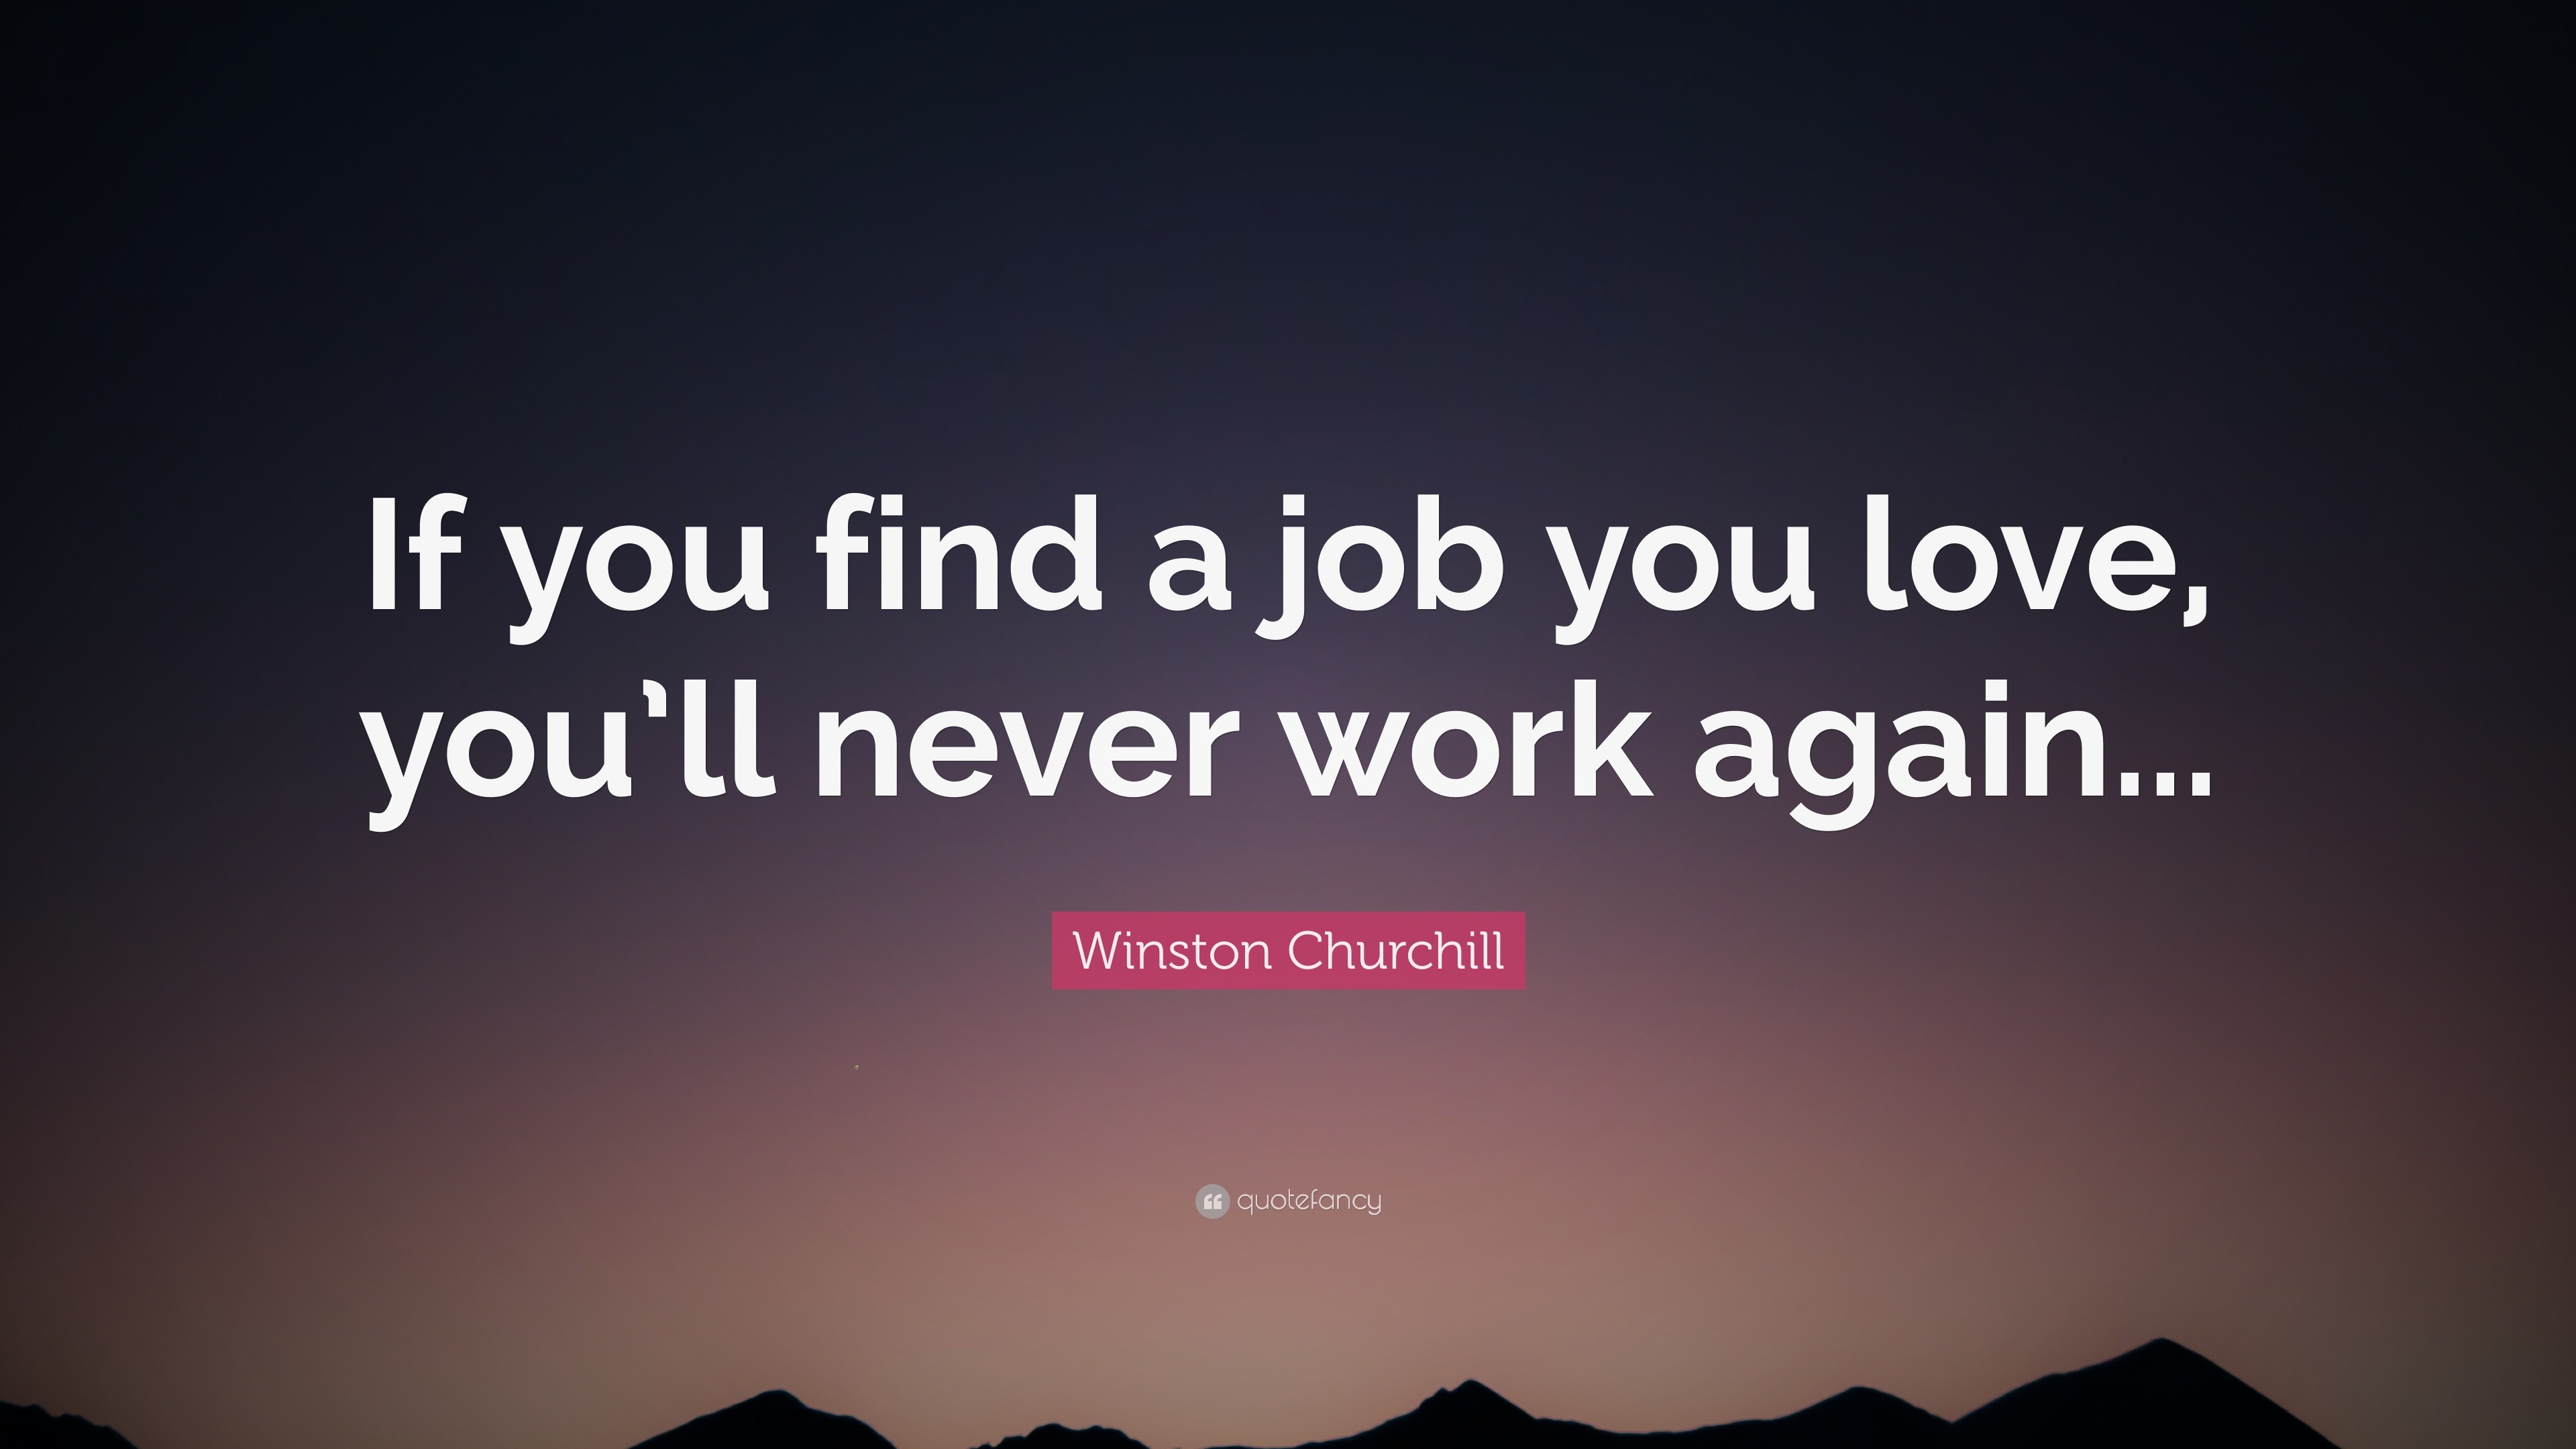 Fresh Find A Job You Love and Never Work Again Quote